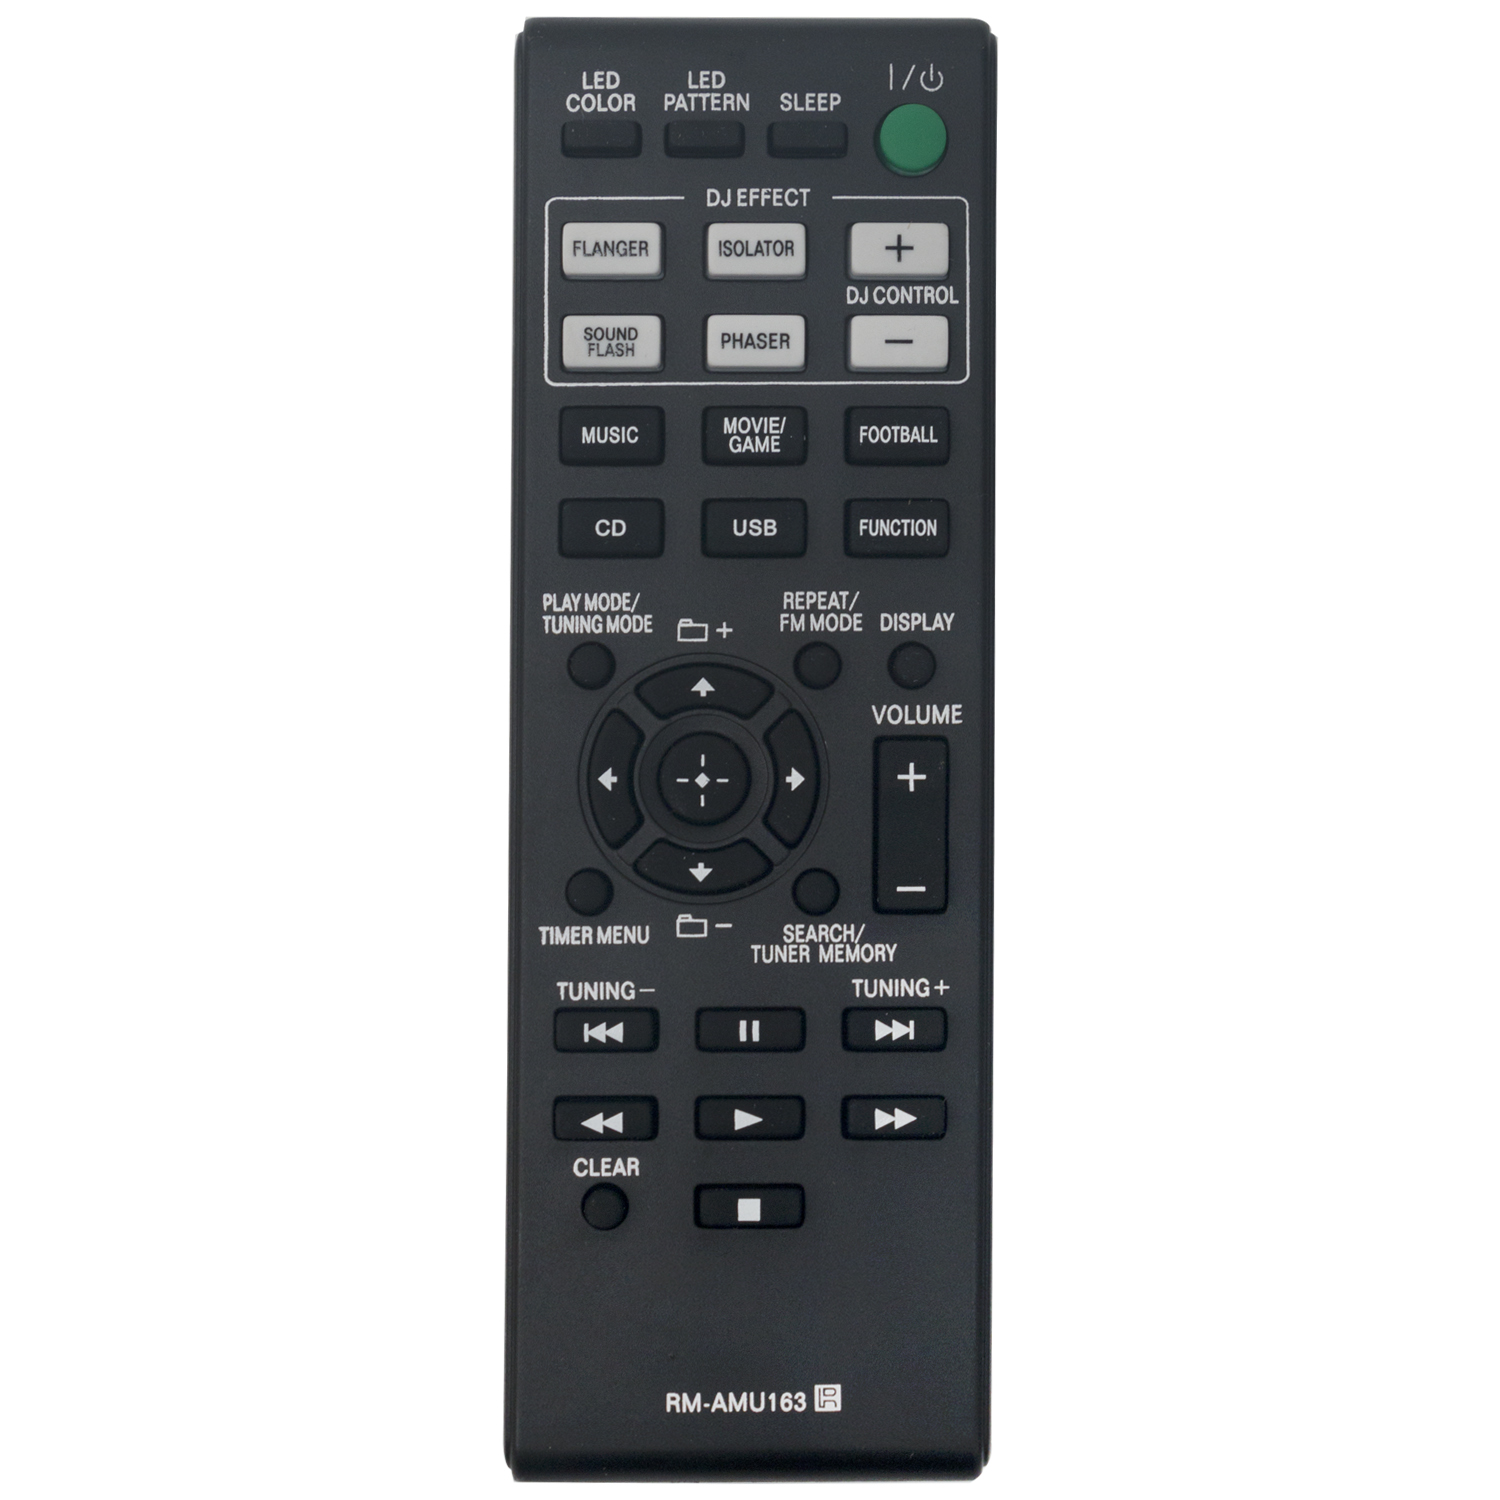 New RM-AMU163 Replaced Remote Control fit for Sony Mini HiFi Component System HCD-GPX55 LBT-GPX55 LBT-GPX77 SS-WGP55 SS-GPX55 - image 1 of 4